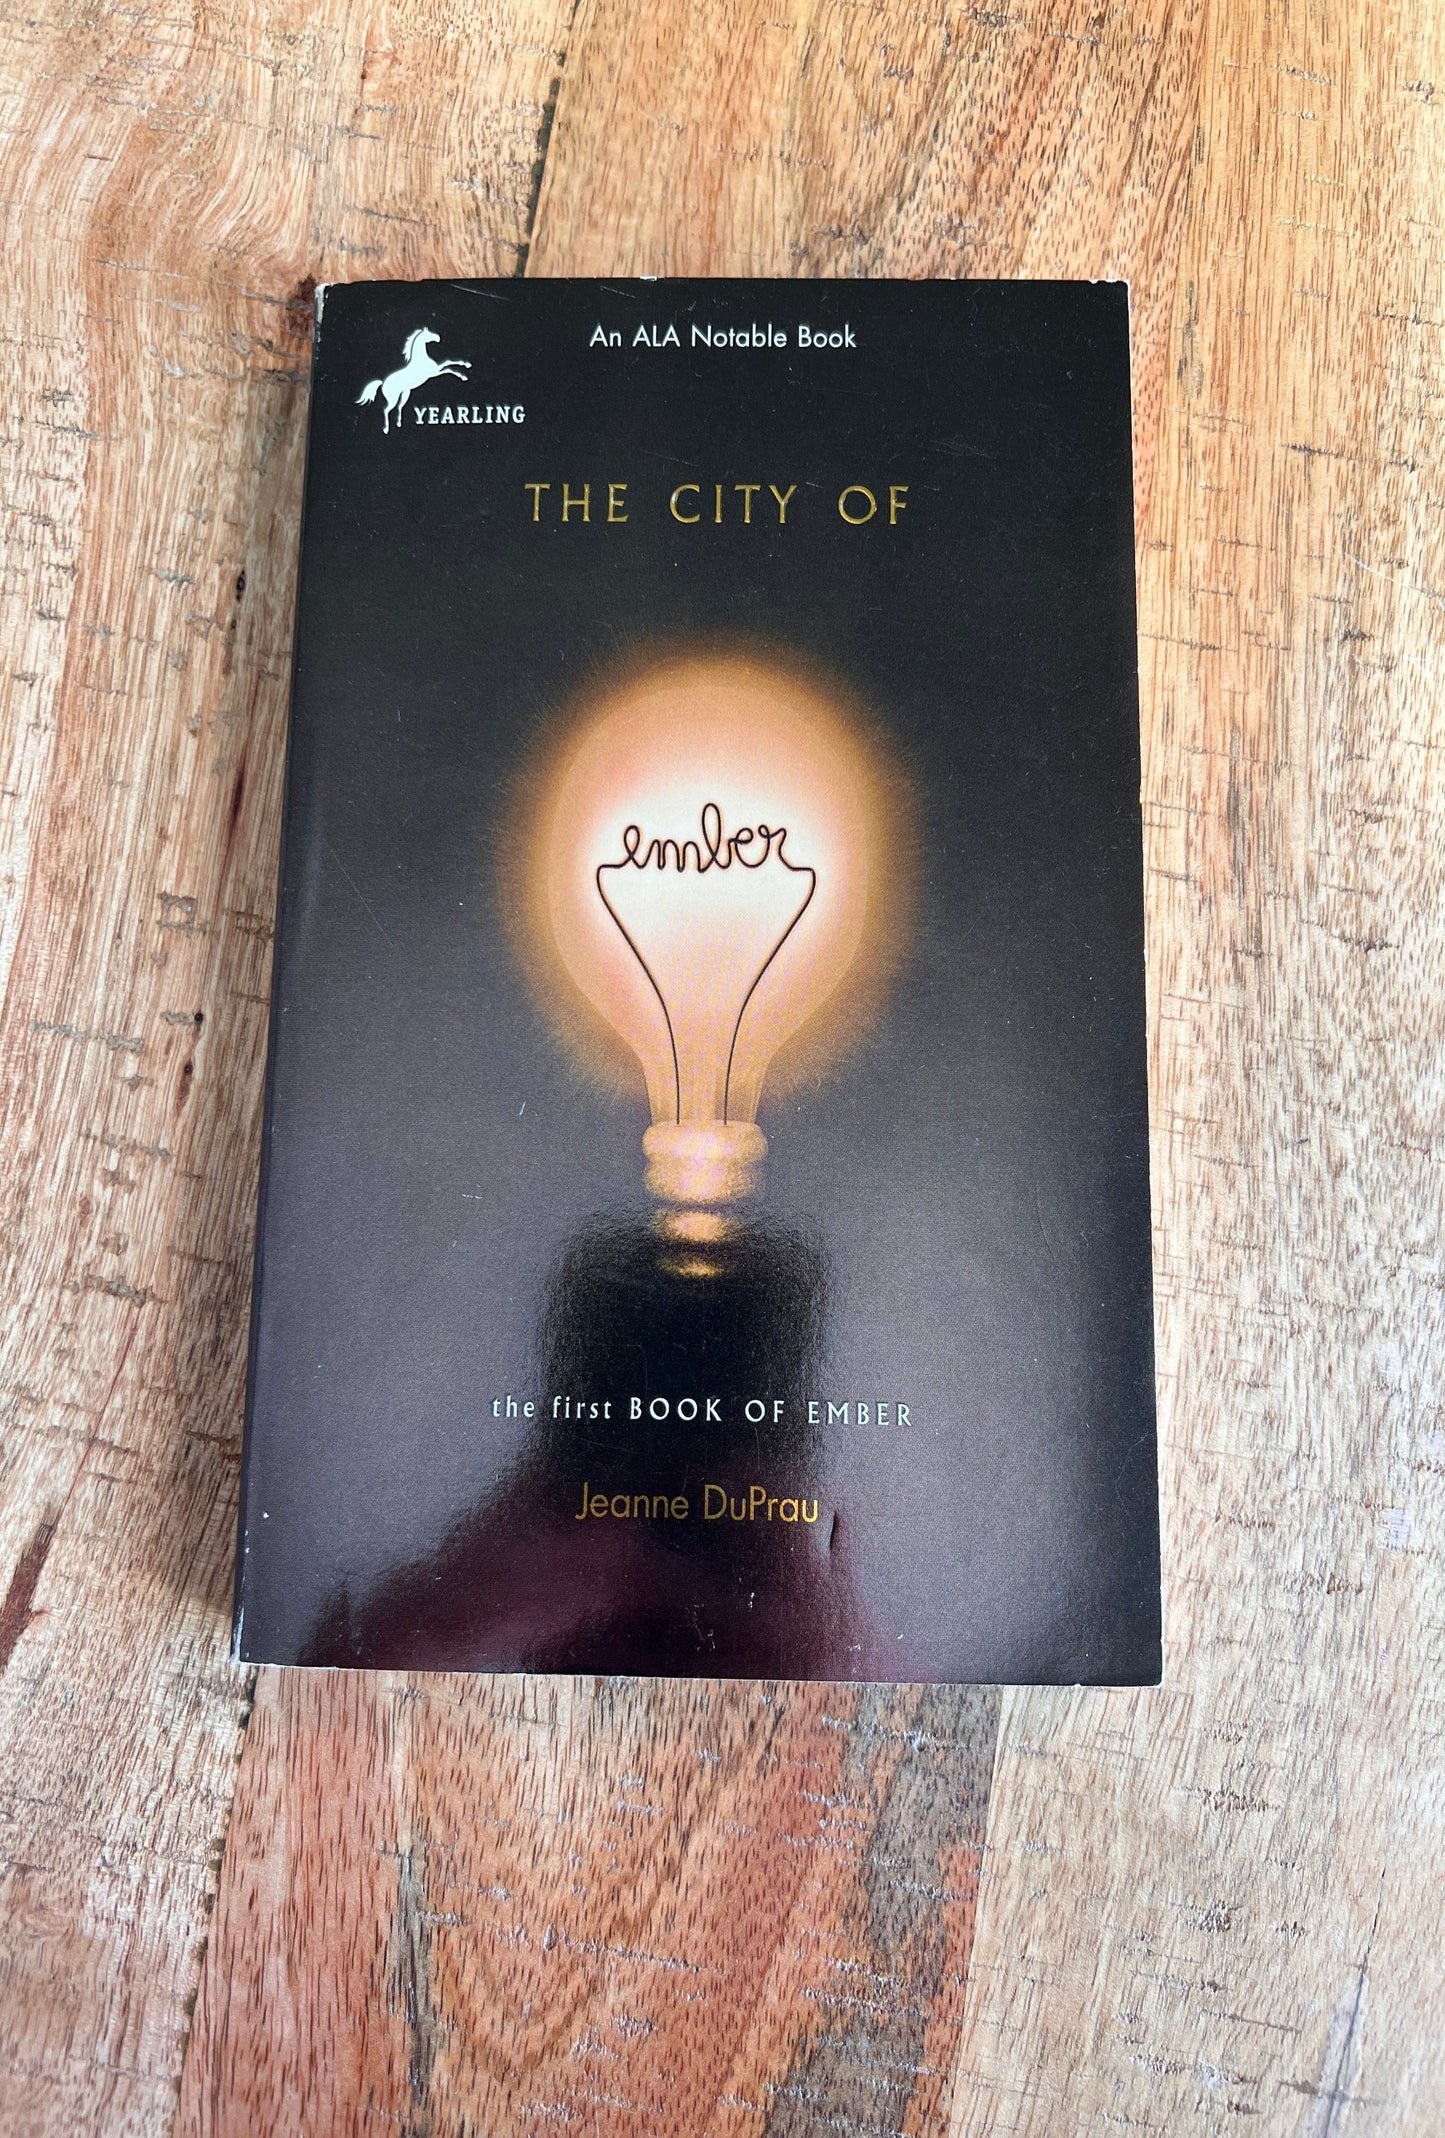 The City of Ember (Book of Ember #1)